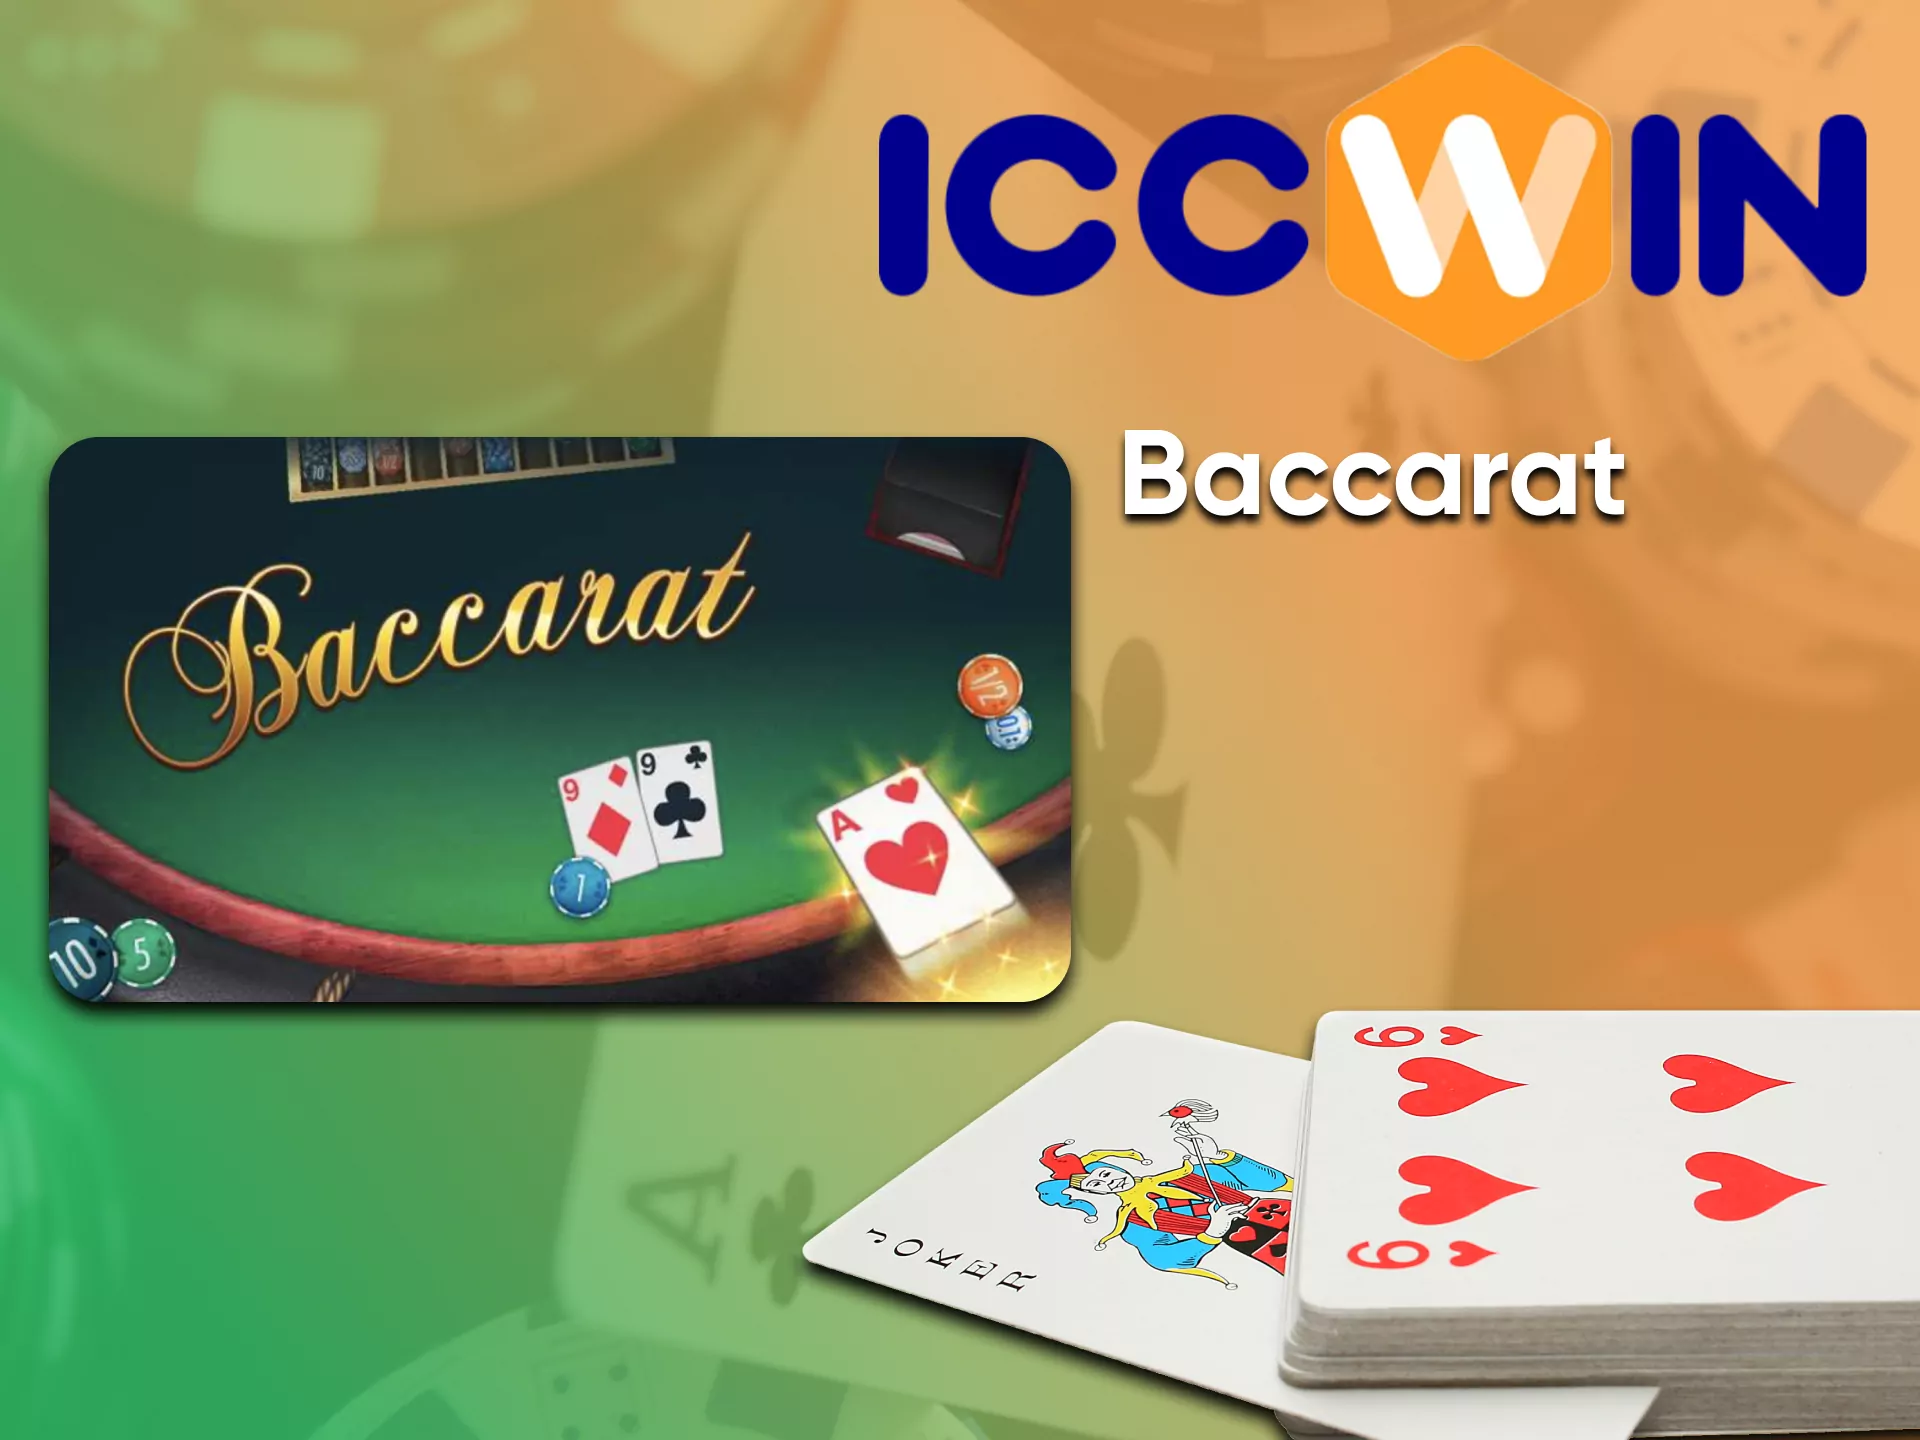 Play Baccarat in the casino section of ICCWin.